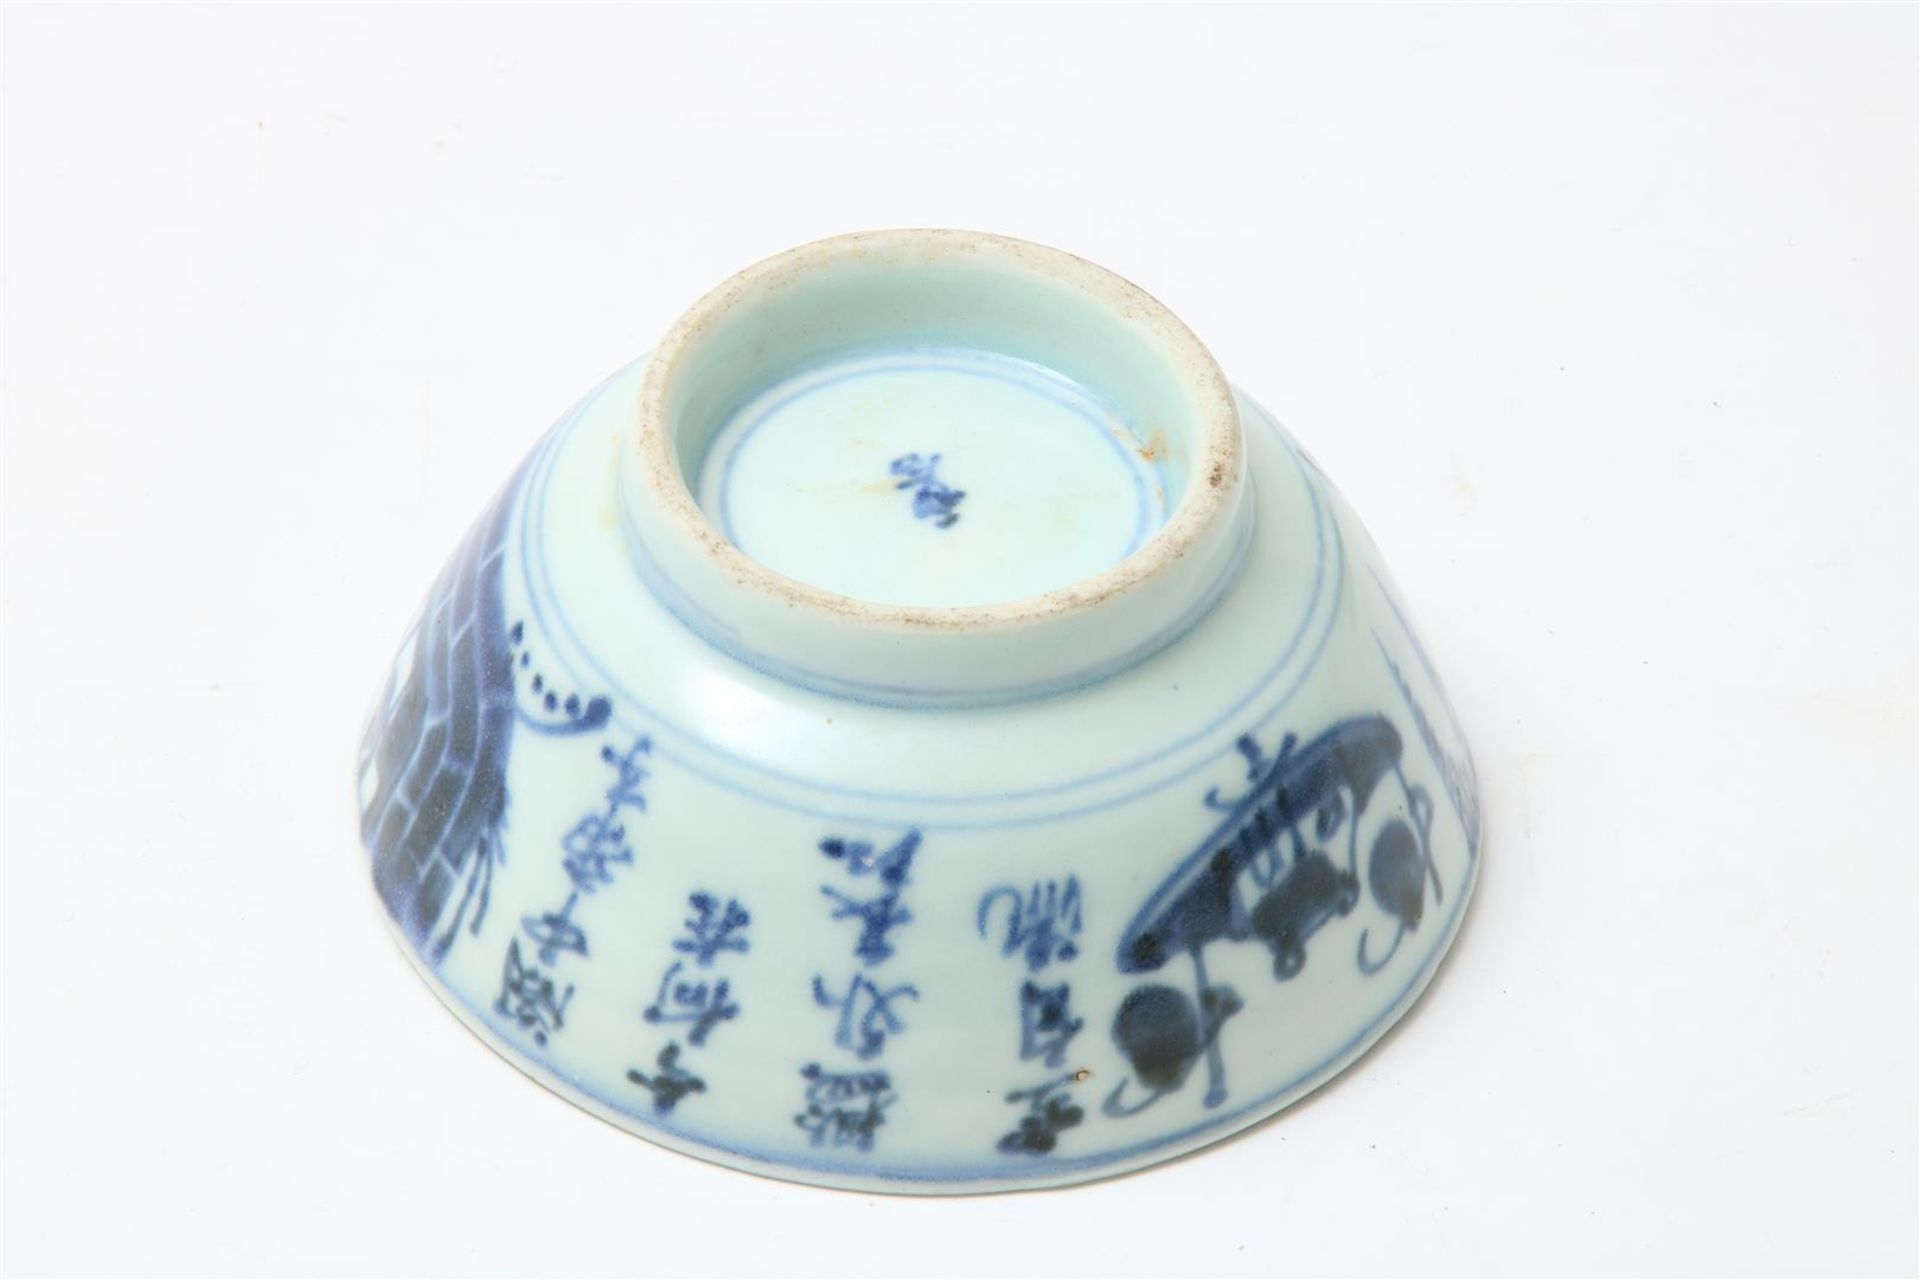 Lot of 5 porcelain dishes (edge flakes) and 4 various saucers, including The Nanking Cargo and Ming, - Image 12 of 19